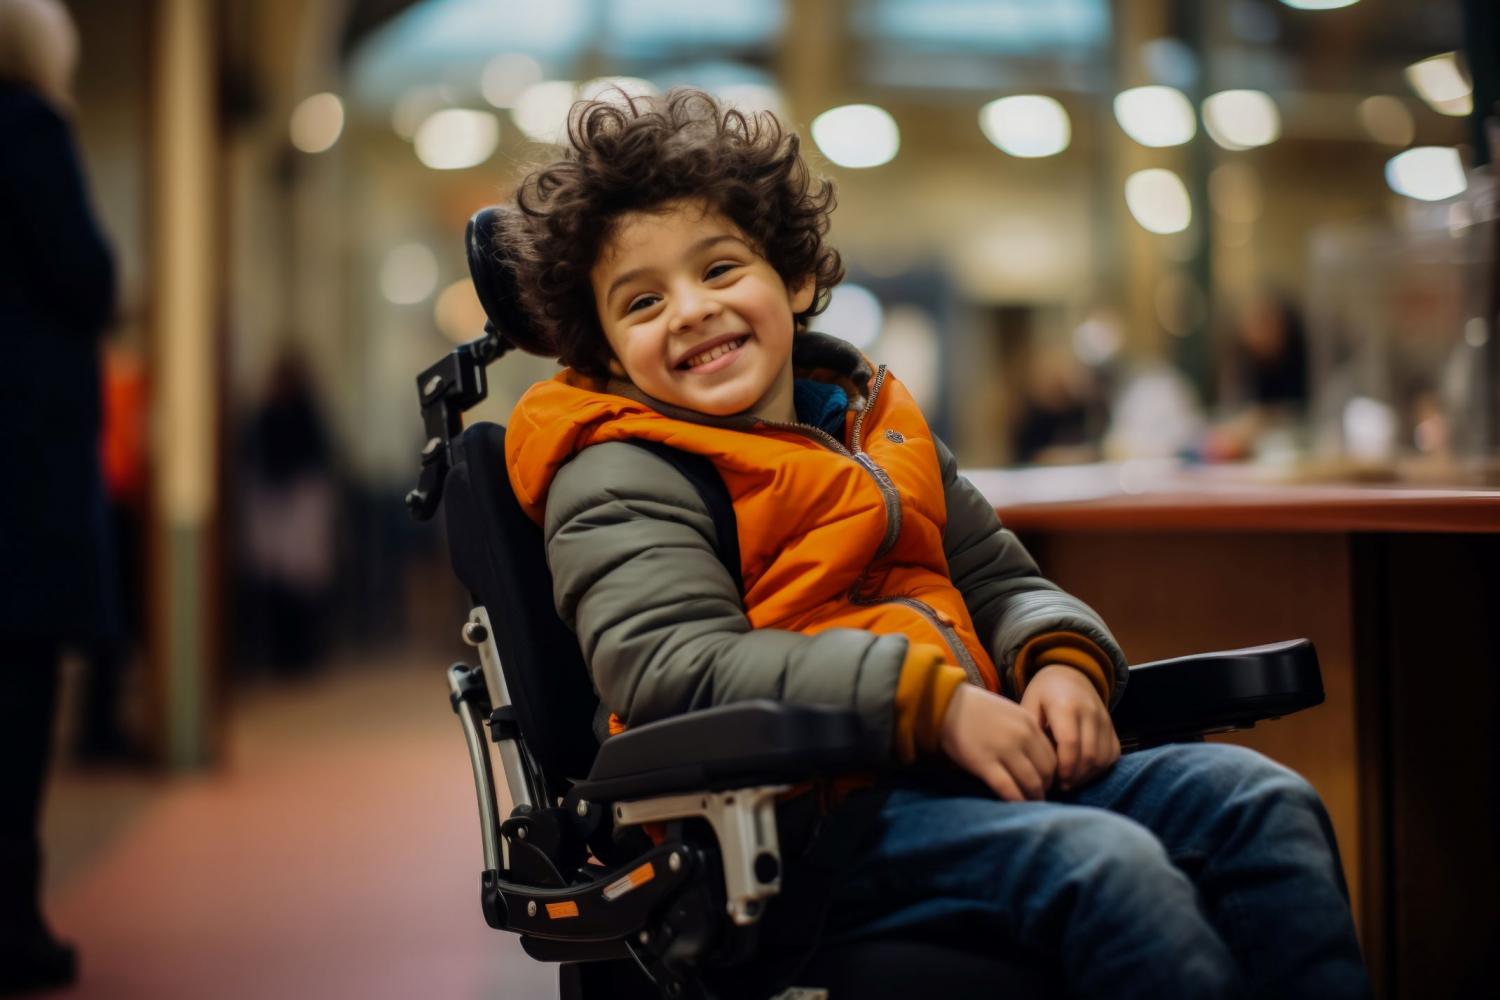 Child with cerebral palsy seated in a wheelchair